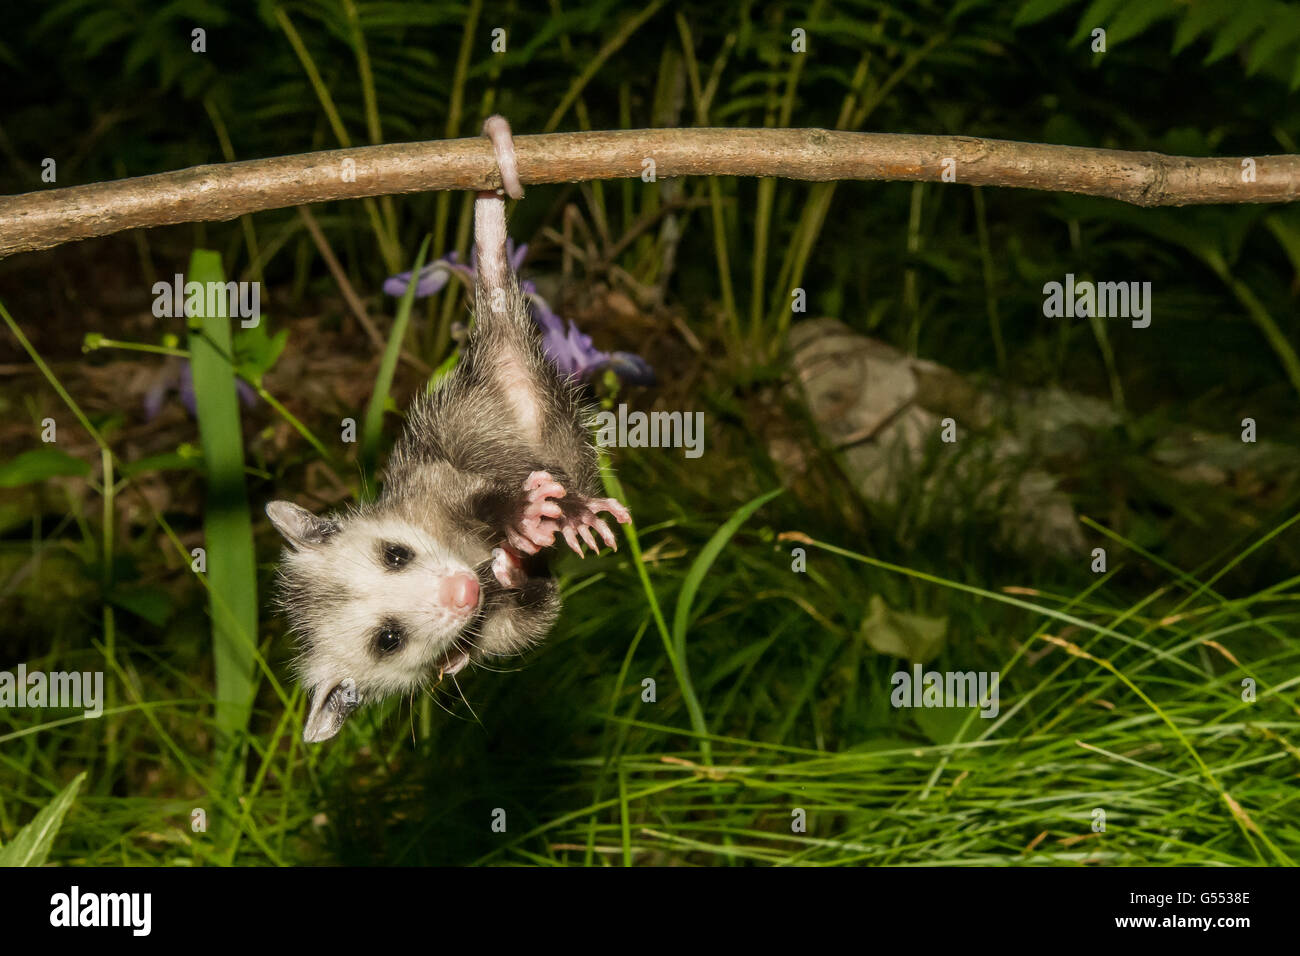 A baby Opossum hanging by it's tail from a branch in the woods. Stock Photo